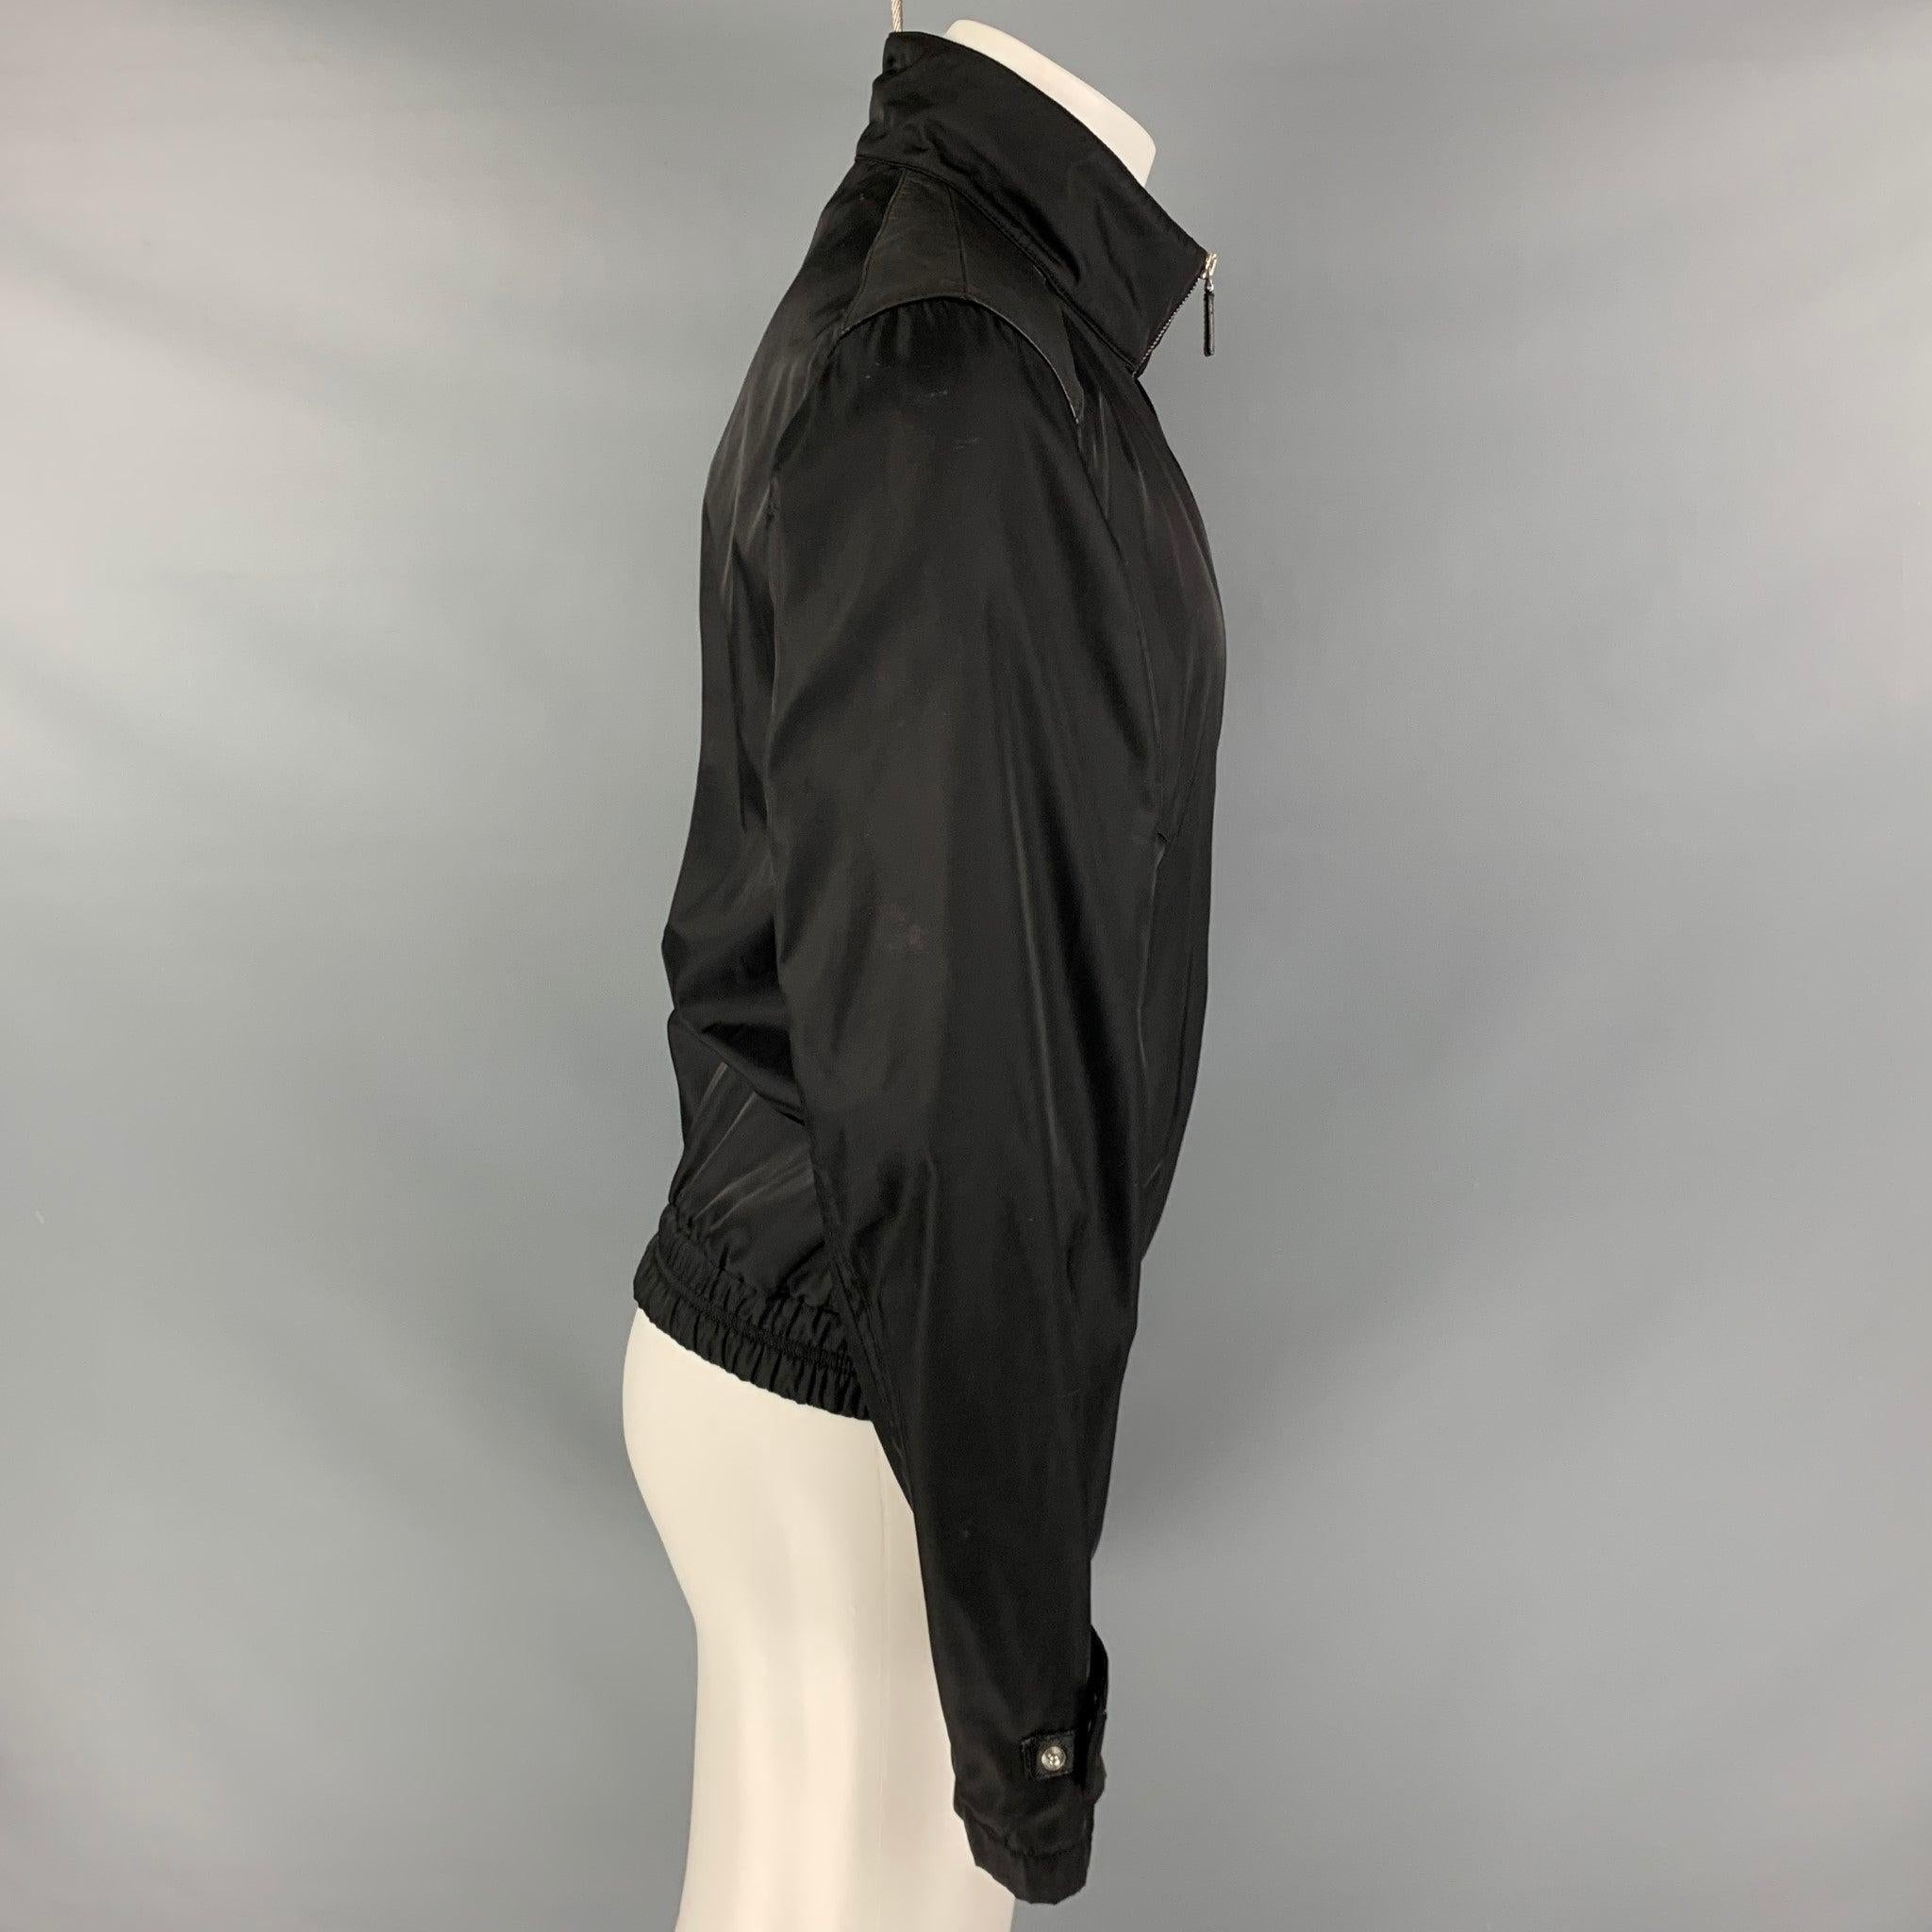 PRADA Sport jacket comes in a black nylon material featuring a bomber style, zipper pockets, leather detail on shoulder, elastic bottom hem, and a full zip up closure. Excellent Pre-Owned Condition. 

Marked:   40 

Measurements: 
 
Shoulder: 17.5